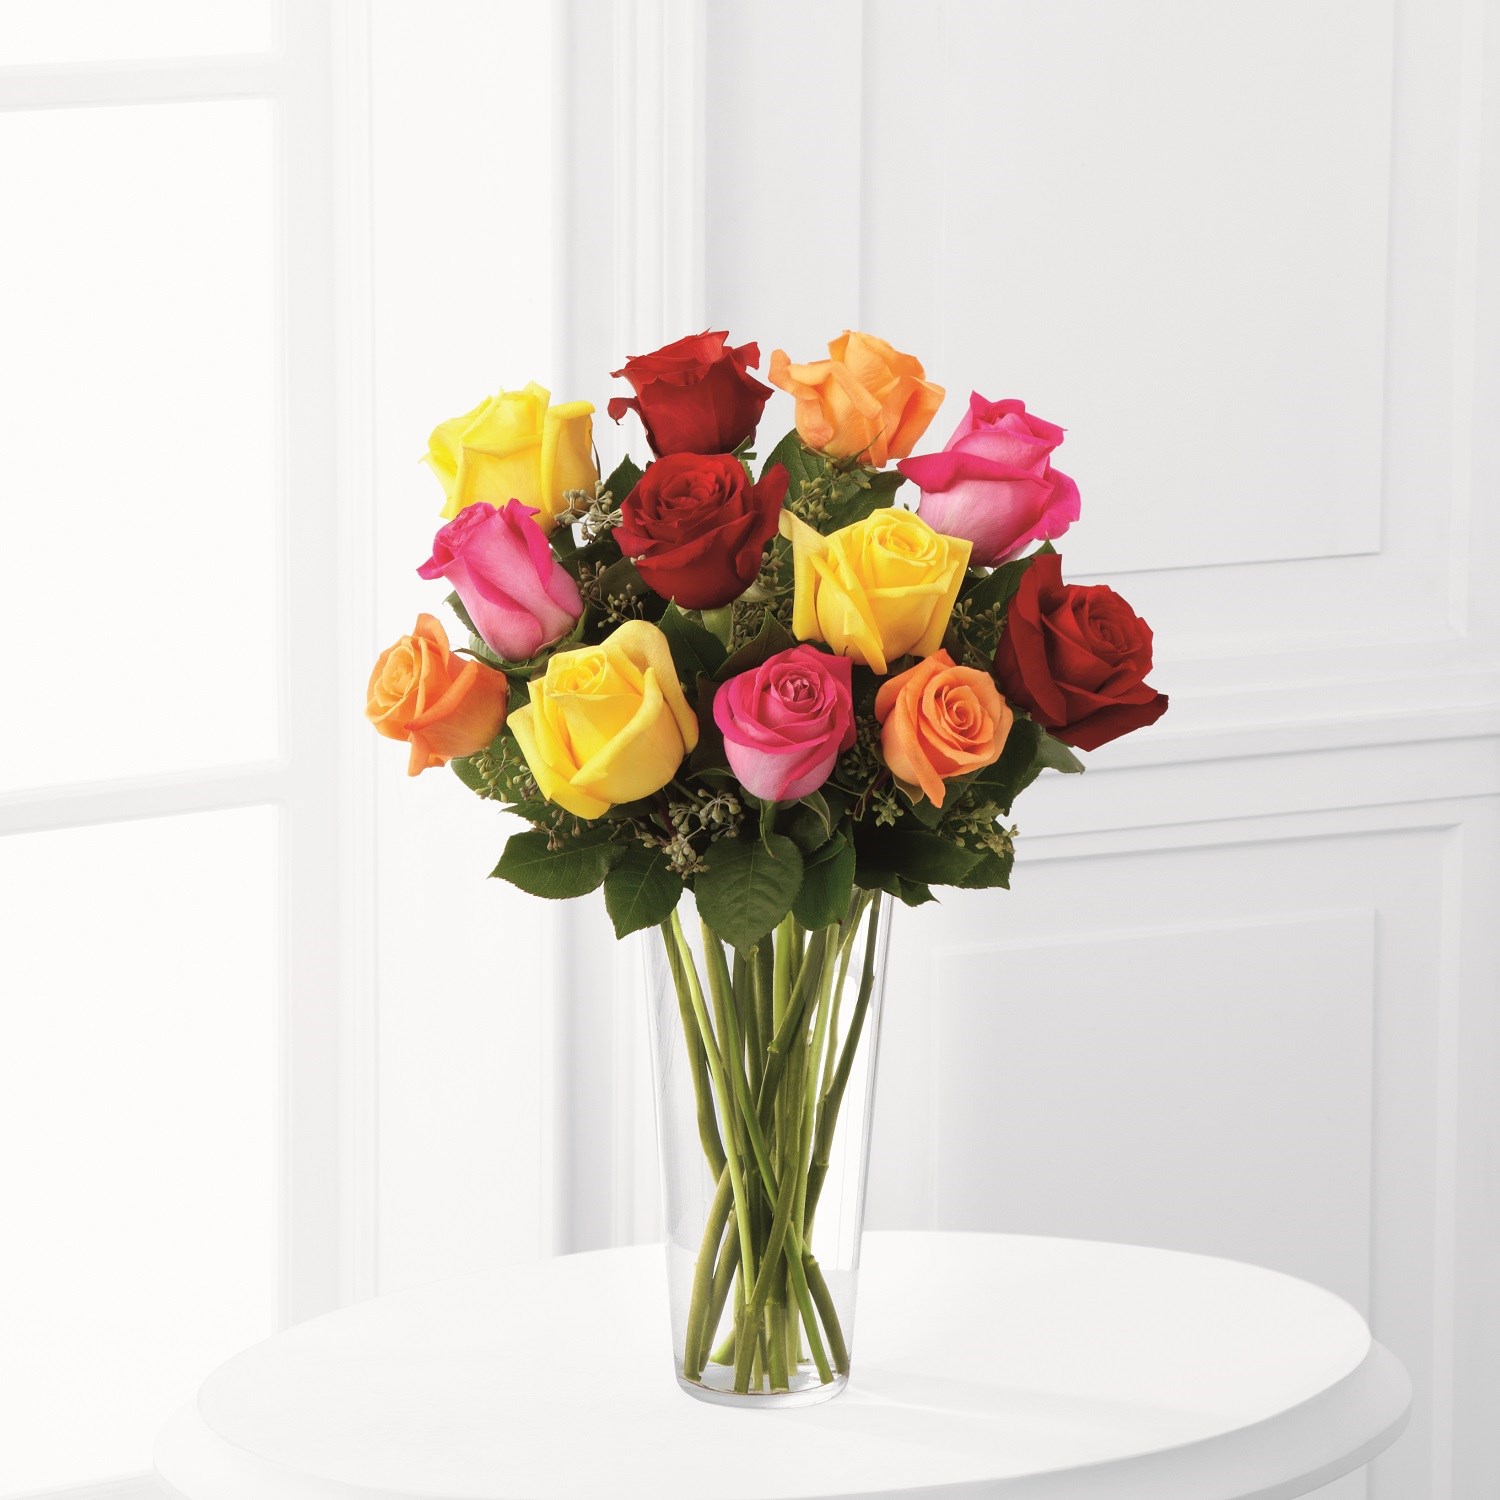 product image for The FTD Bright Spark Rose Bouquet